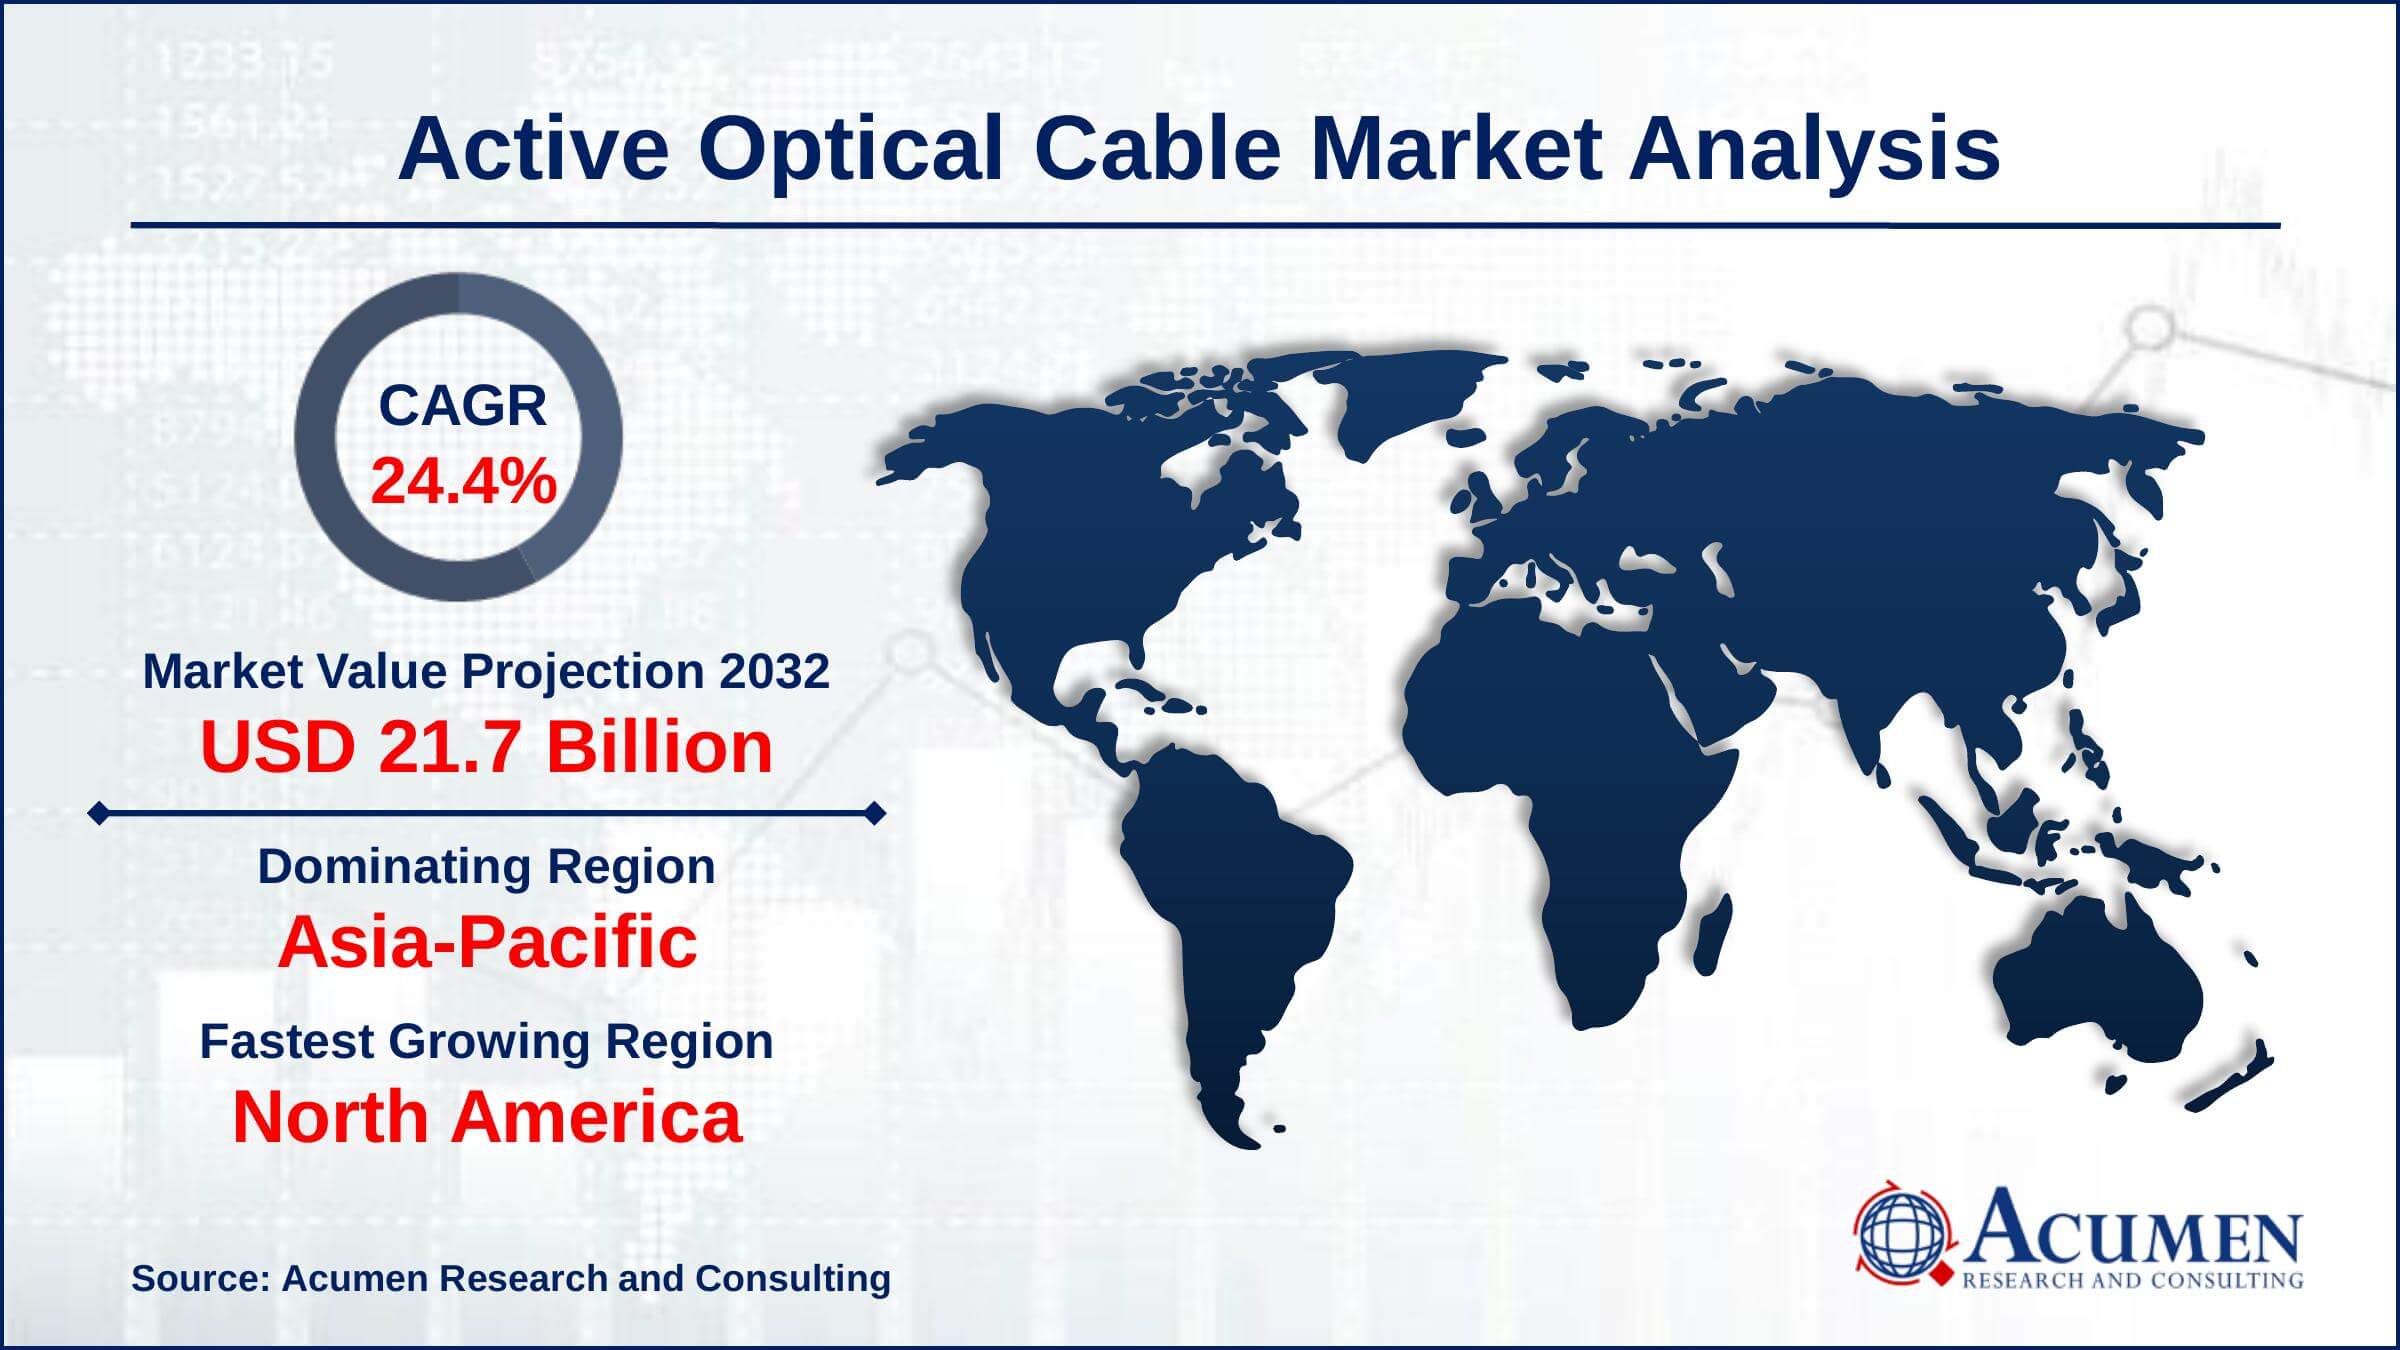 Global Active Optical Cable Market Trends